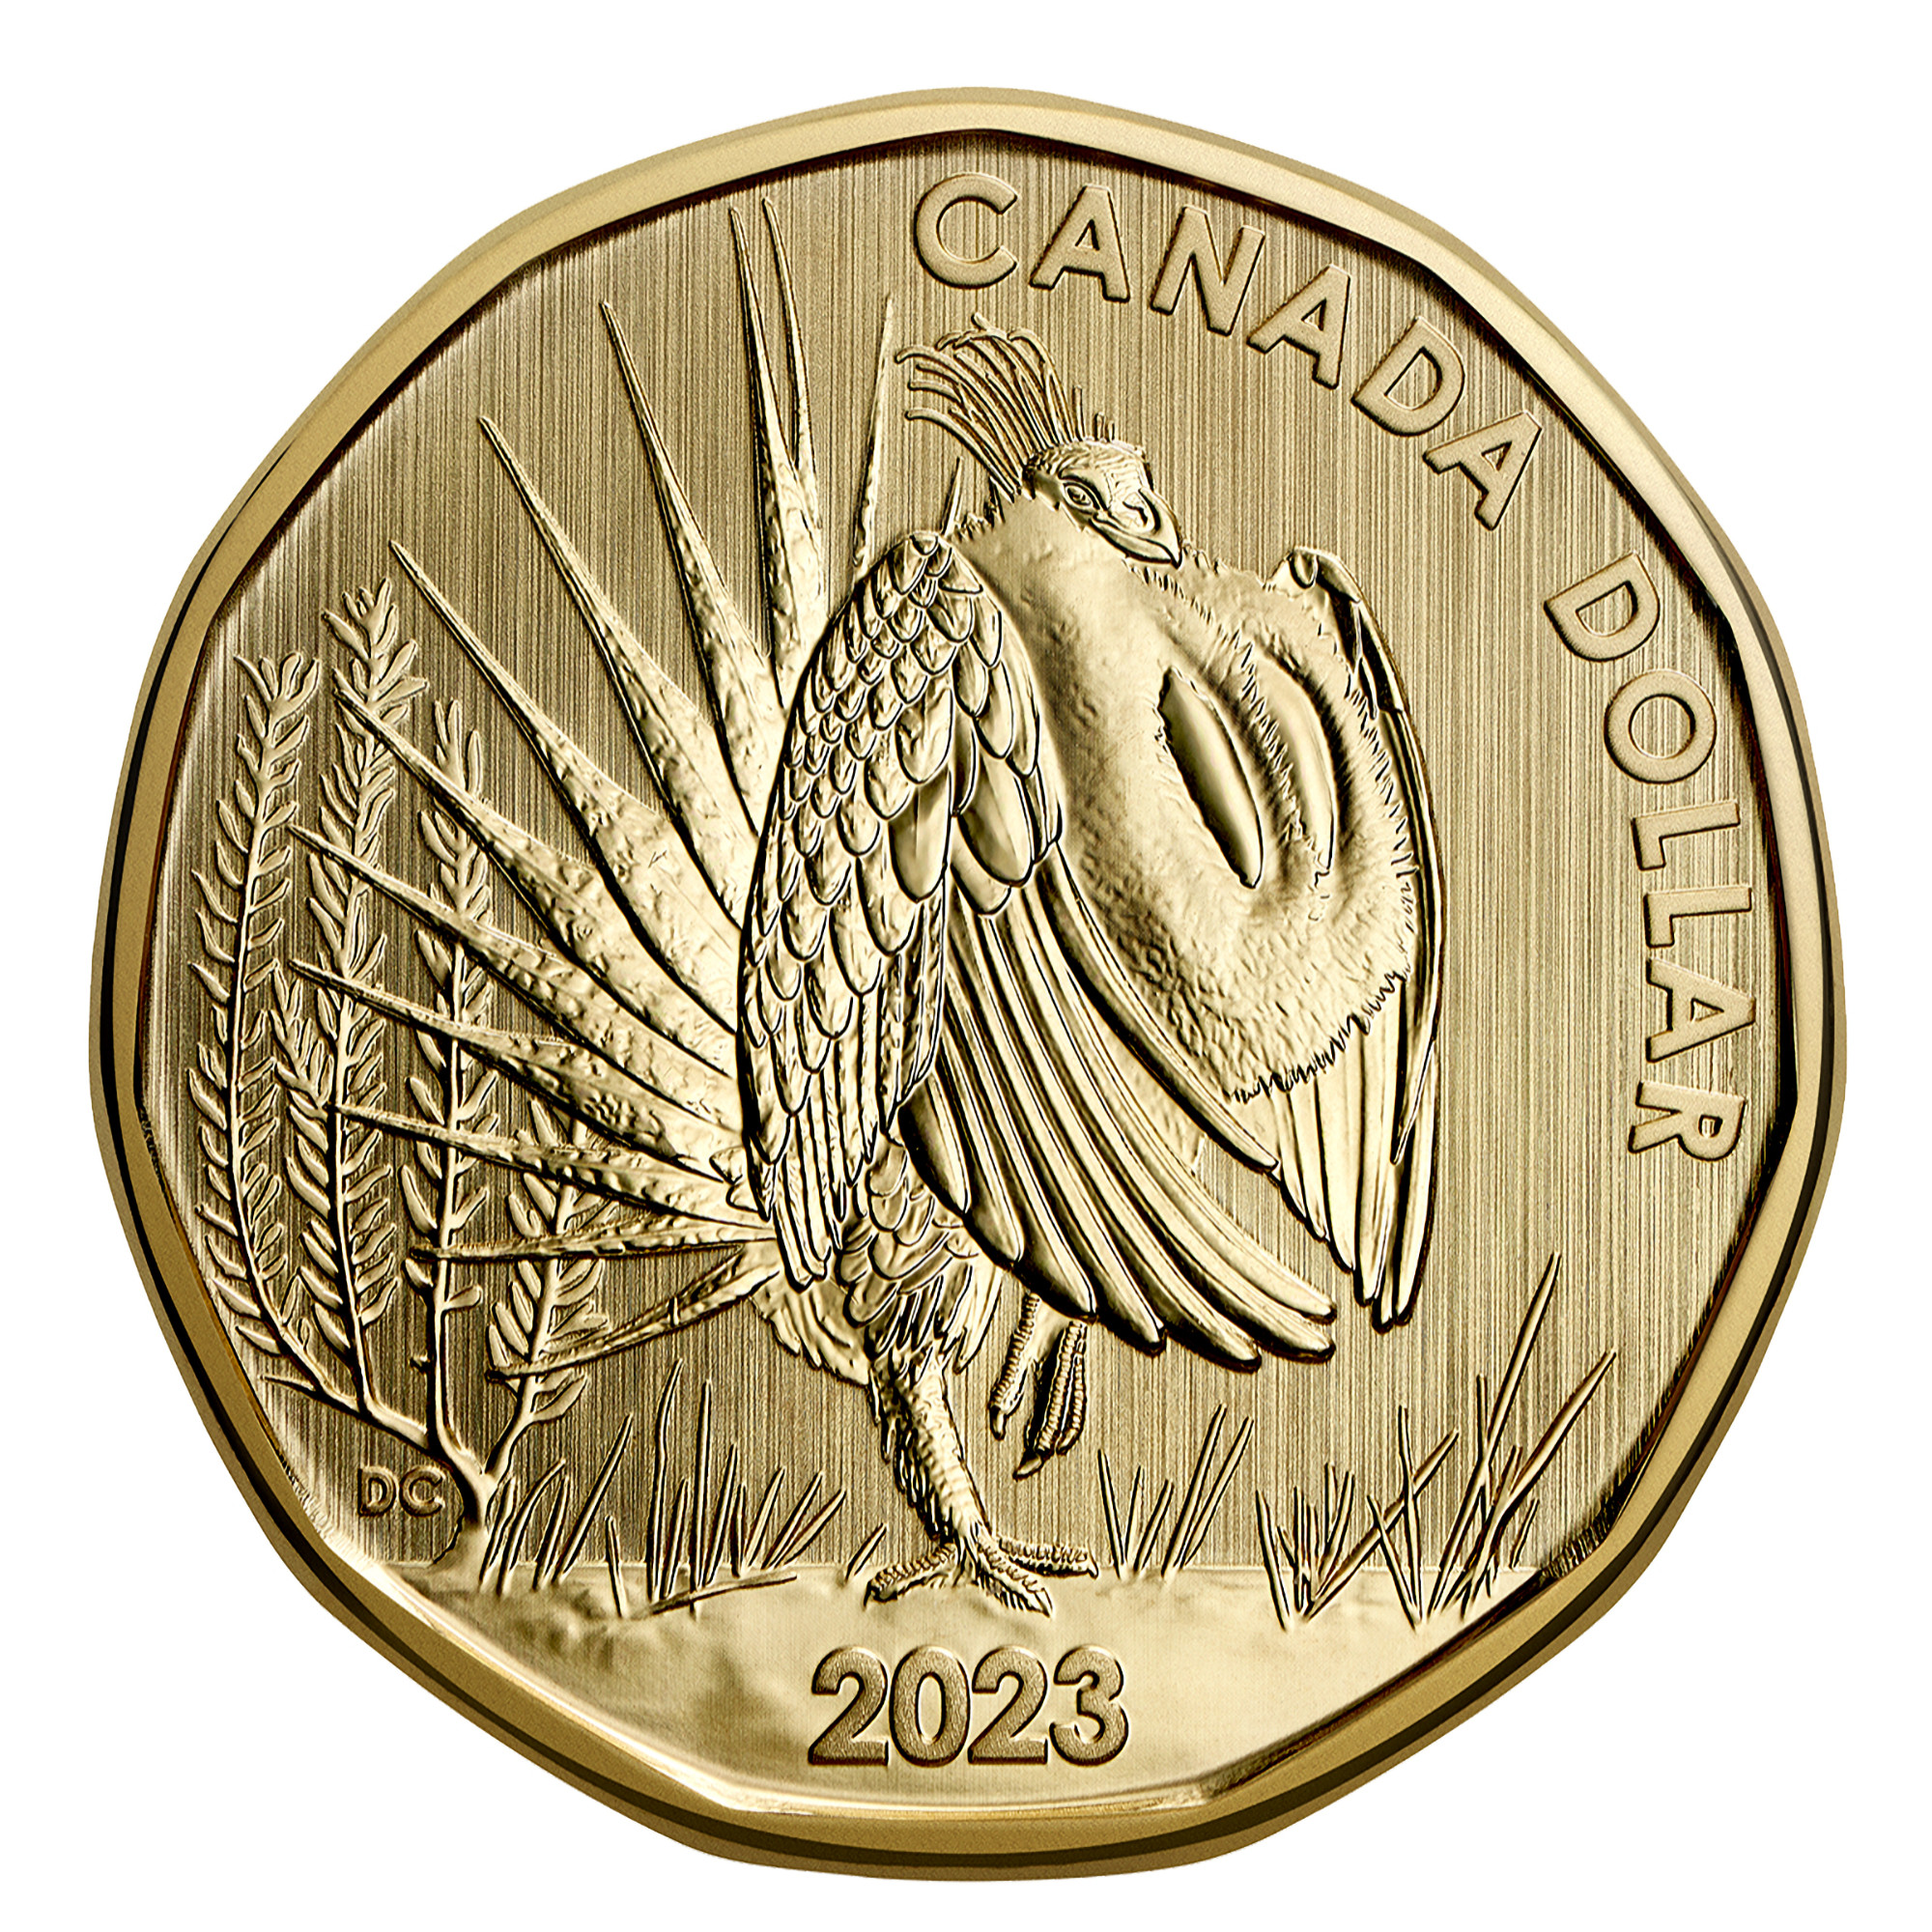 Coins and Canada - 1 dollar 2021 - Proof, Proof-like, Specimen, Brilliant  uncirculated